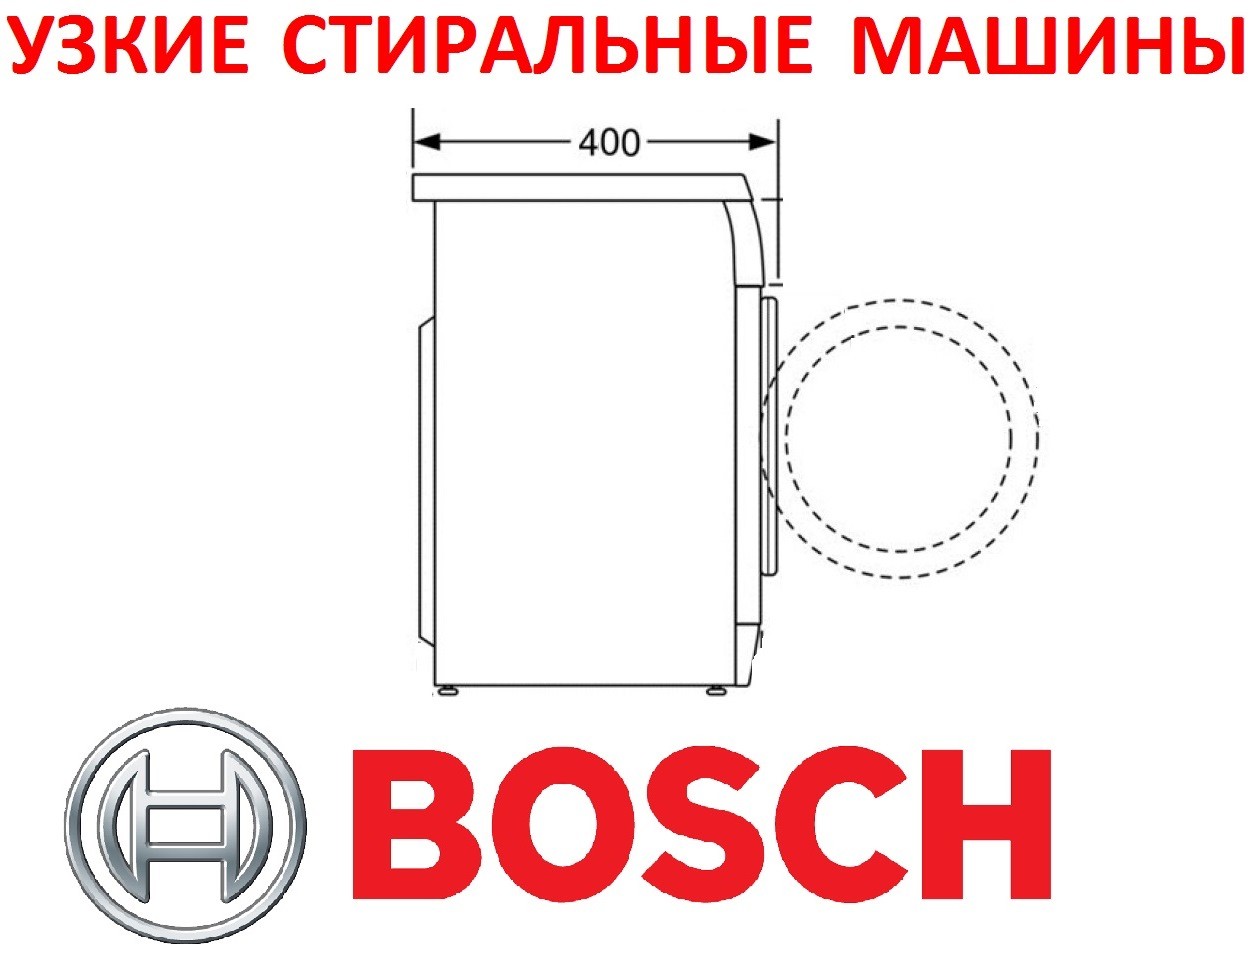 Bosch sempit Front-loading Washers